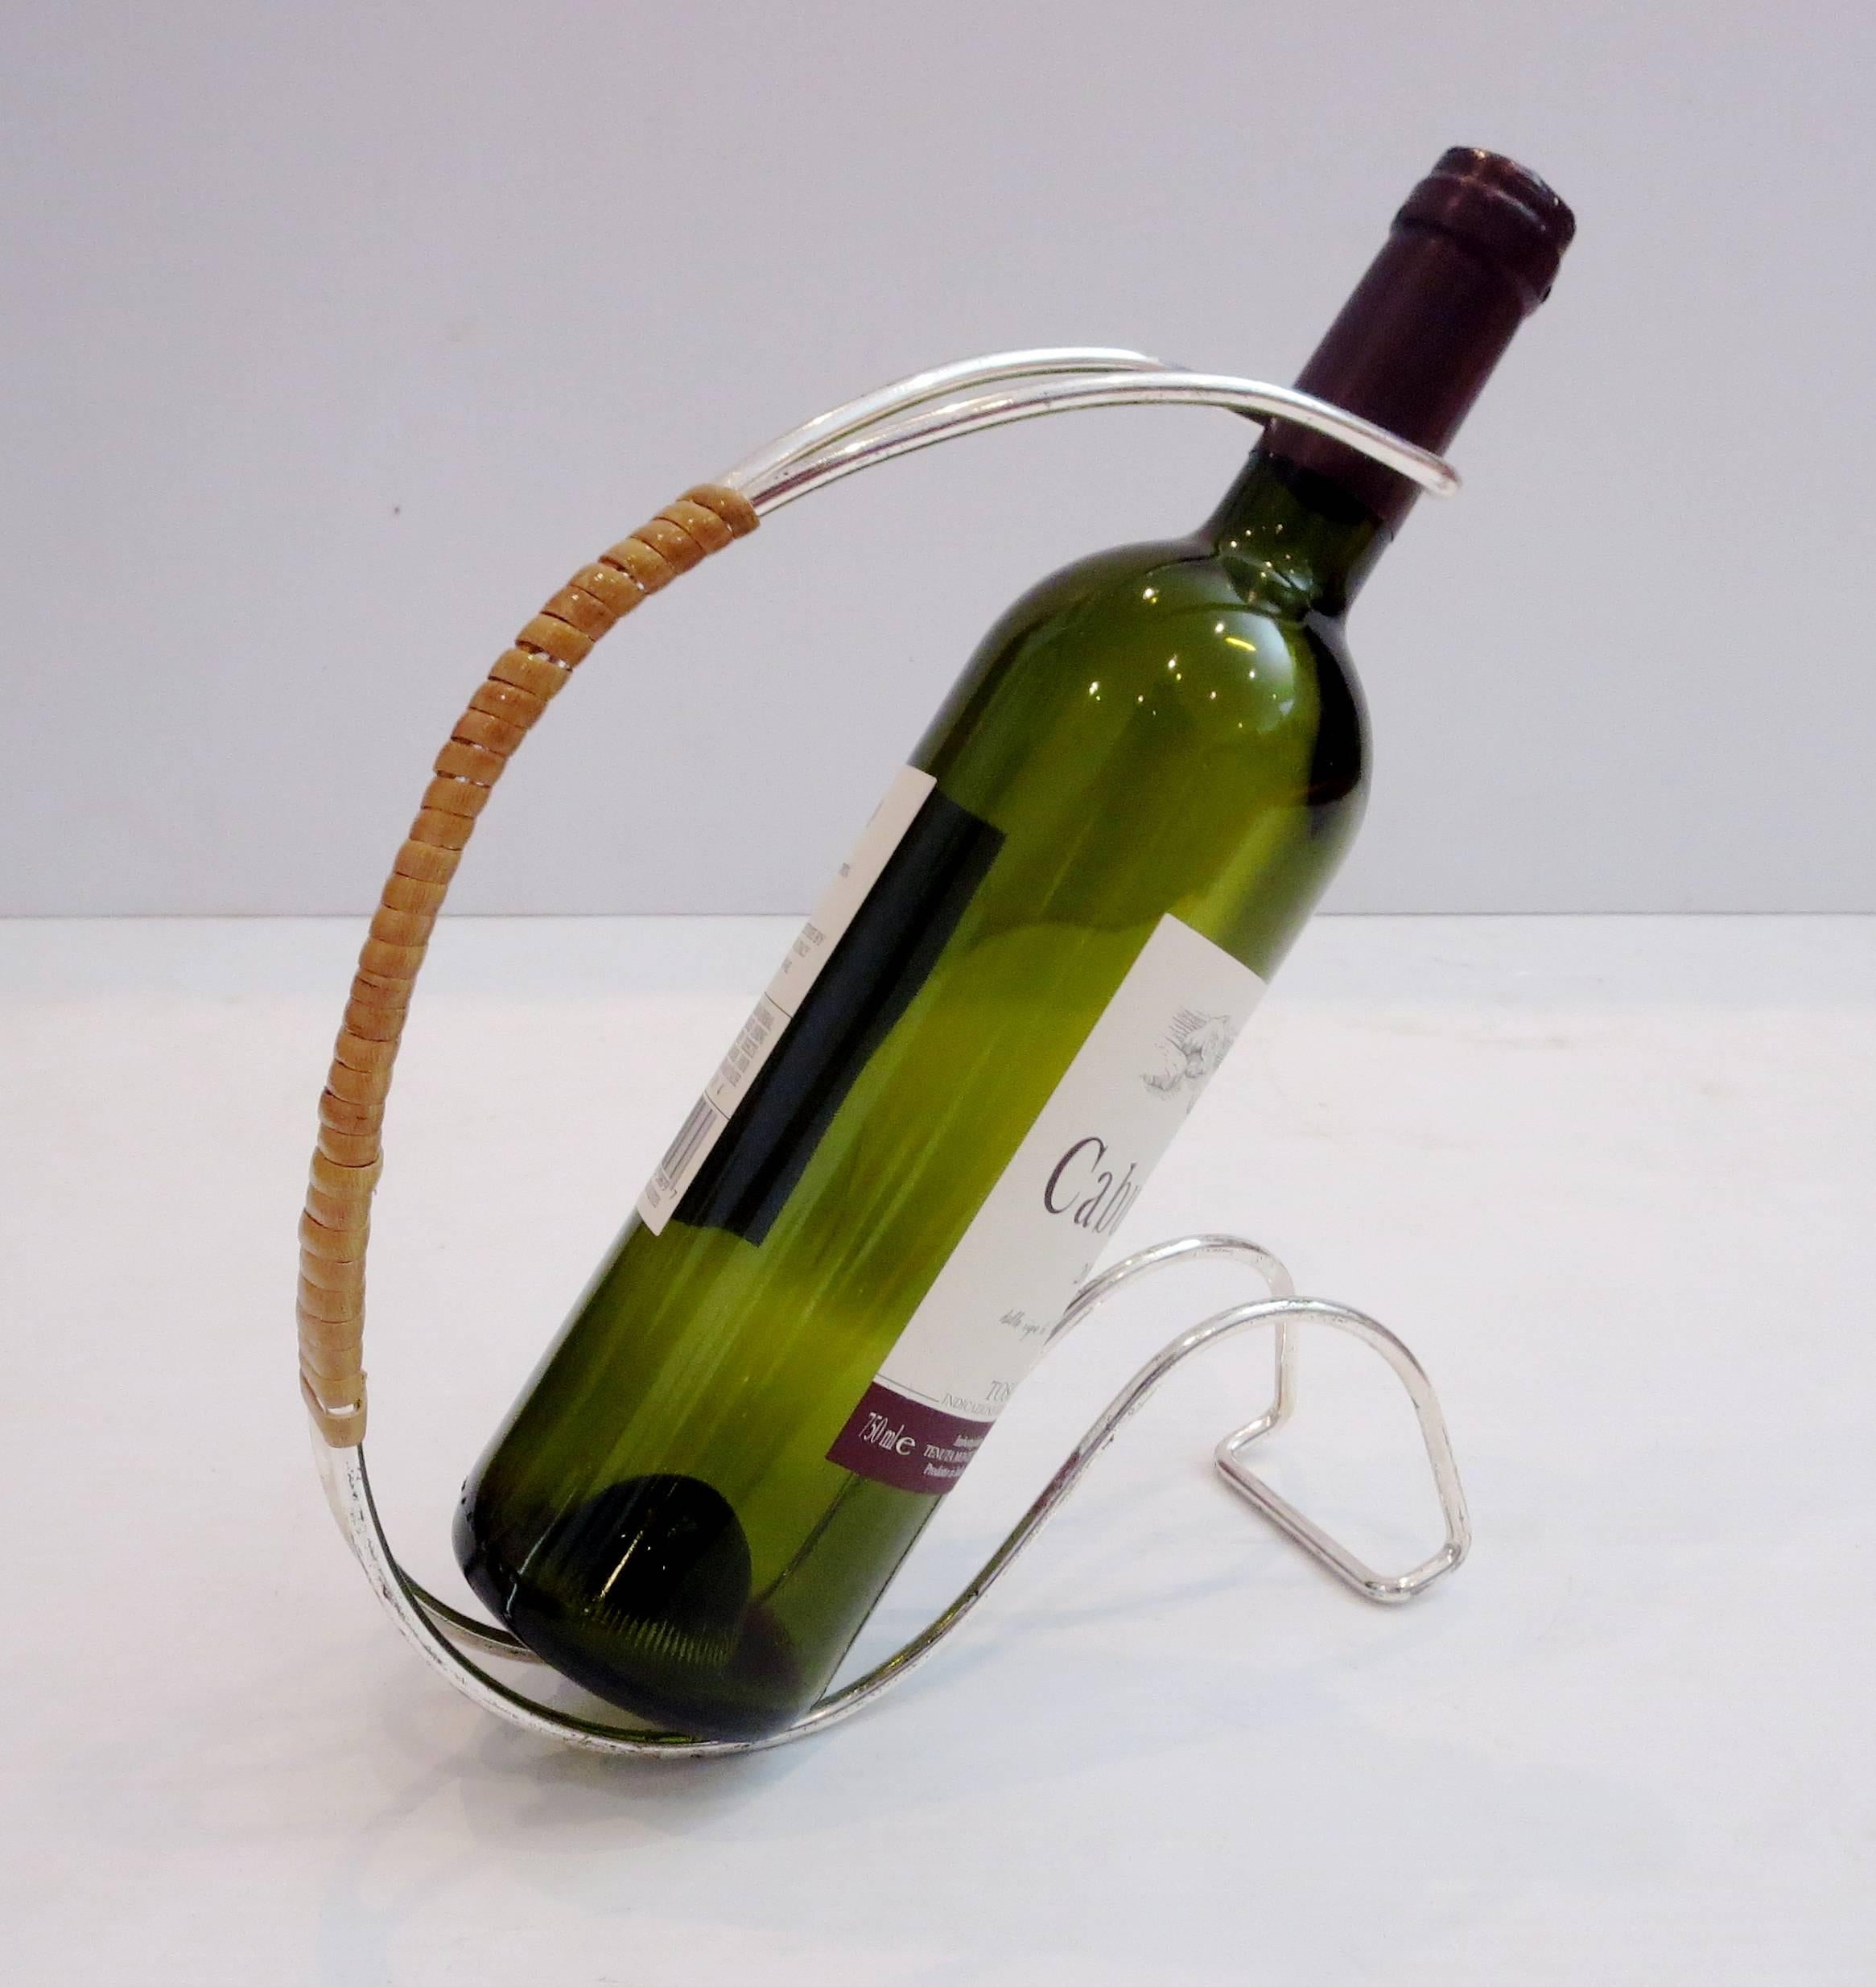 Simple elegant silver plated with cane wrapped handle wine bottle holder , circa 1960s great condition.